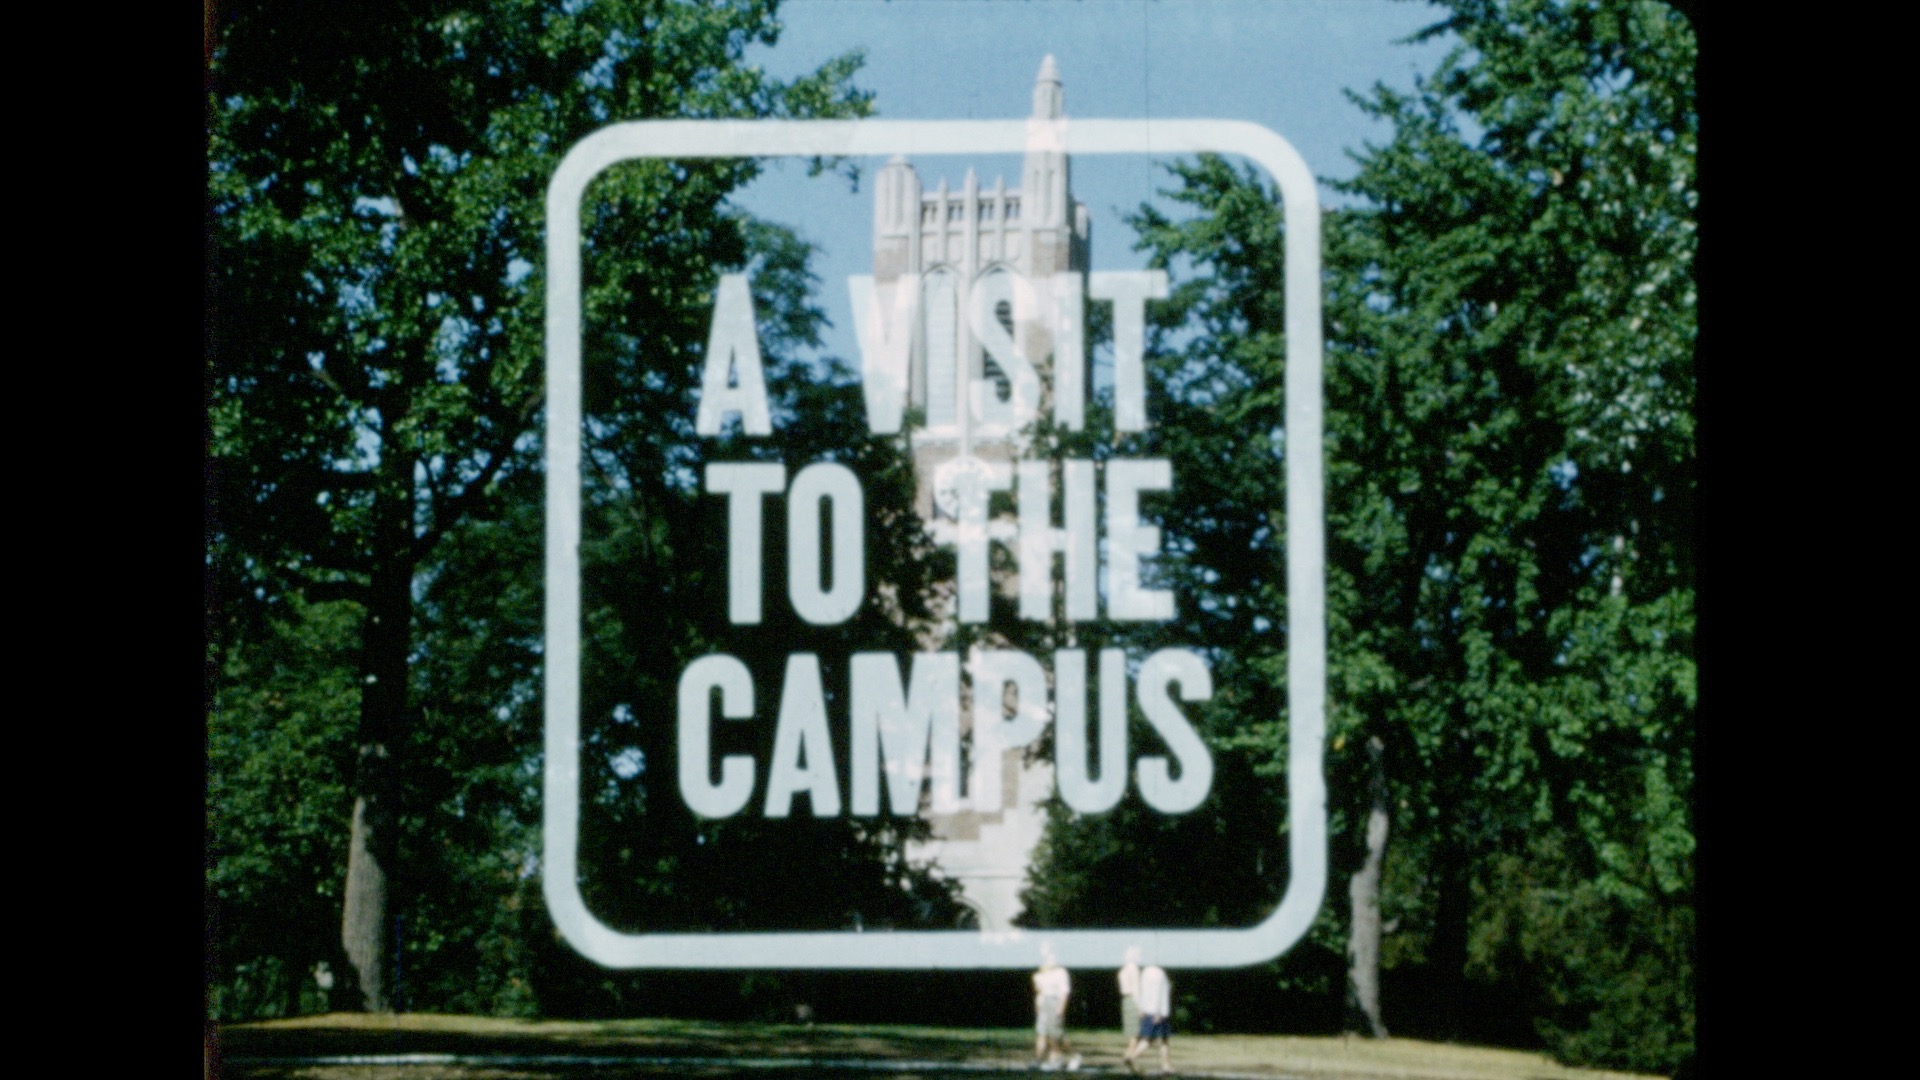 A Visit to the Campus, 1967